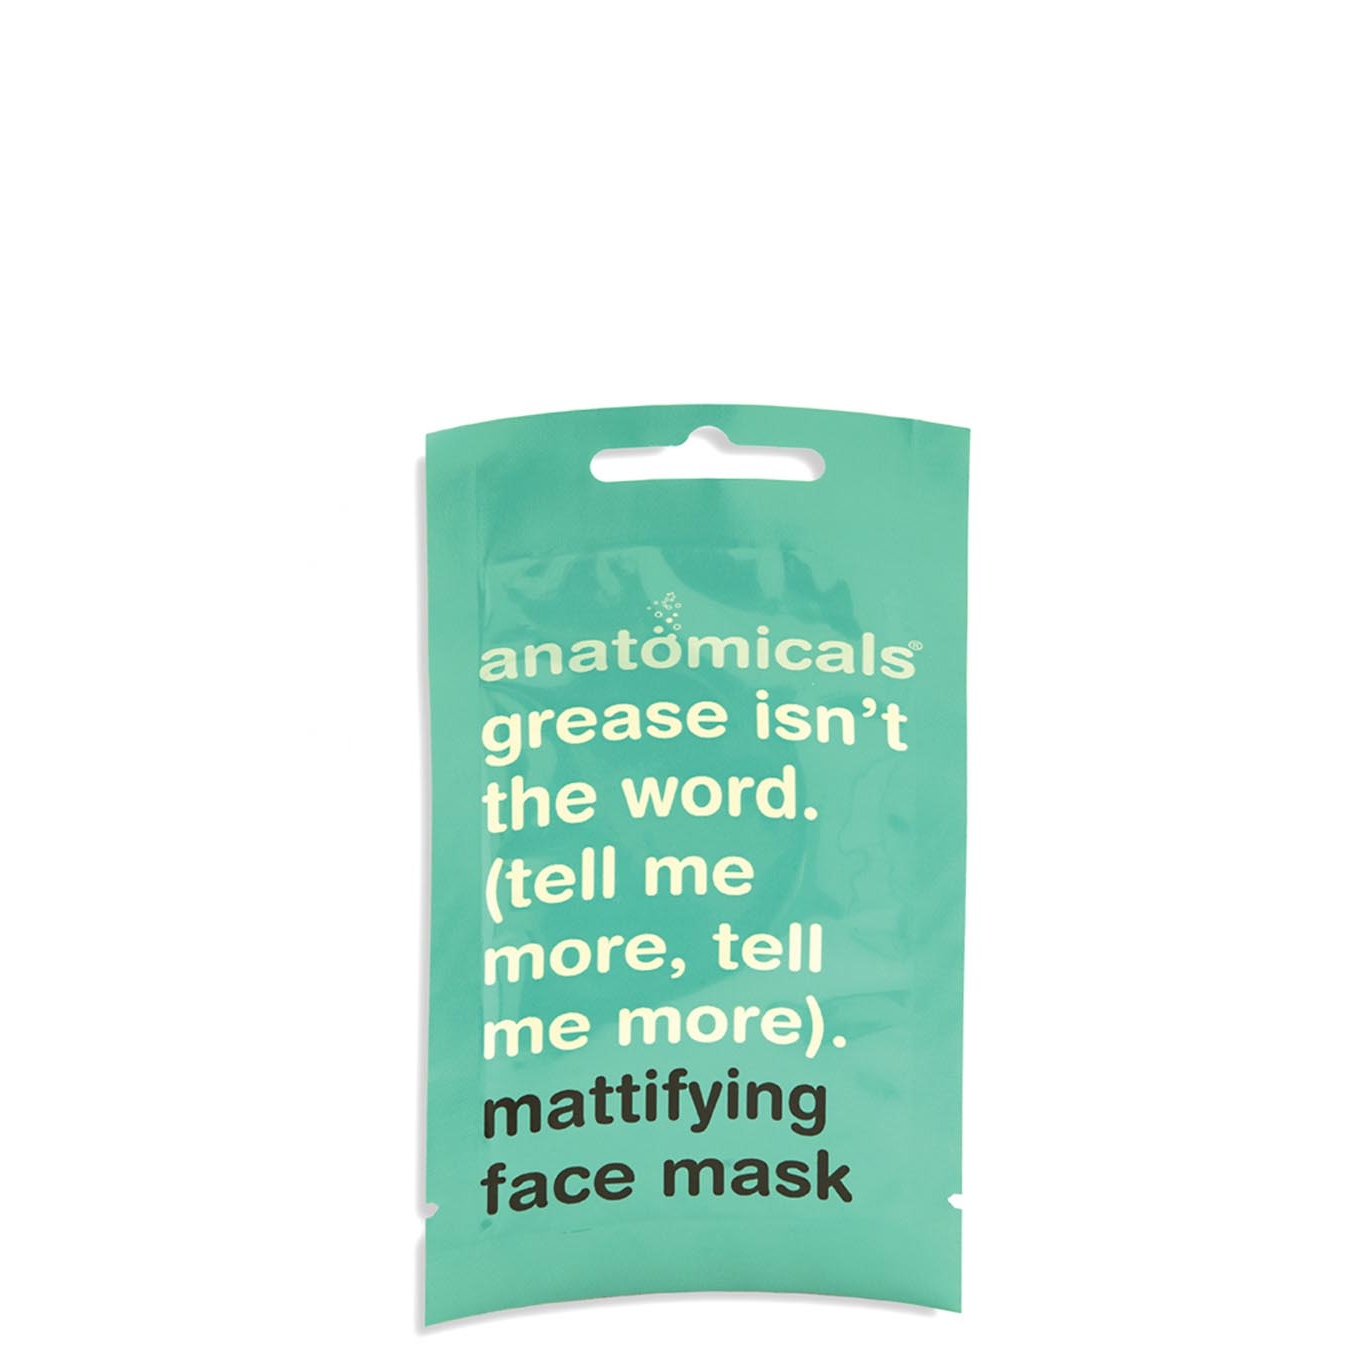 Anatomicals Grease Isn't The Word Mattifying Face Mask